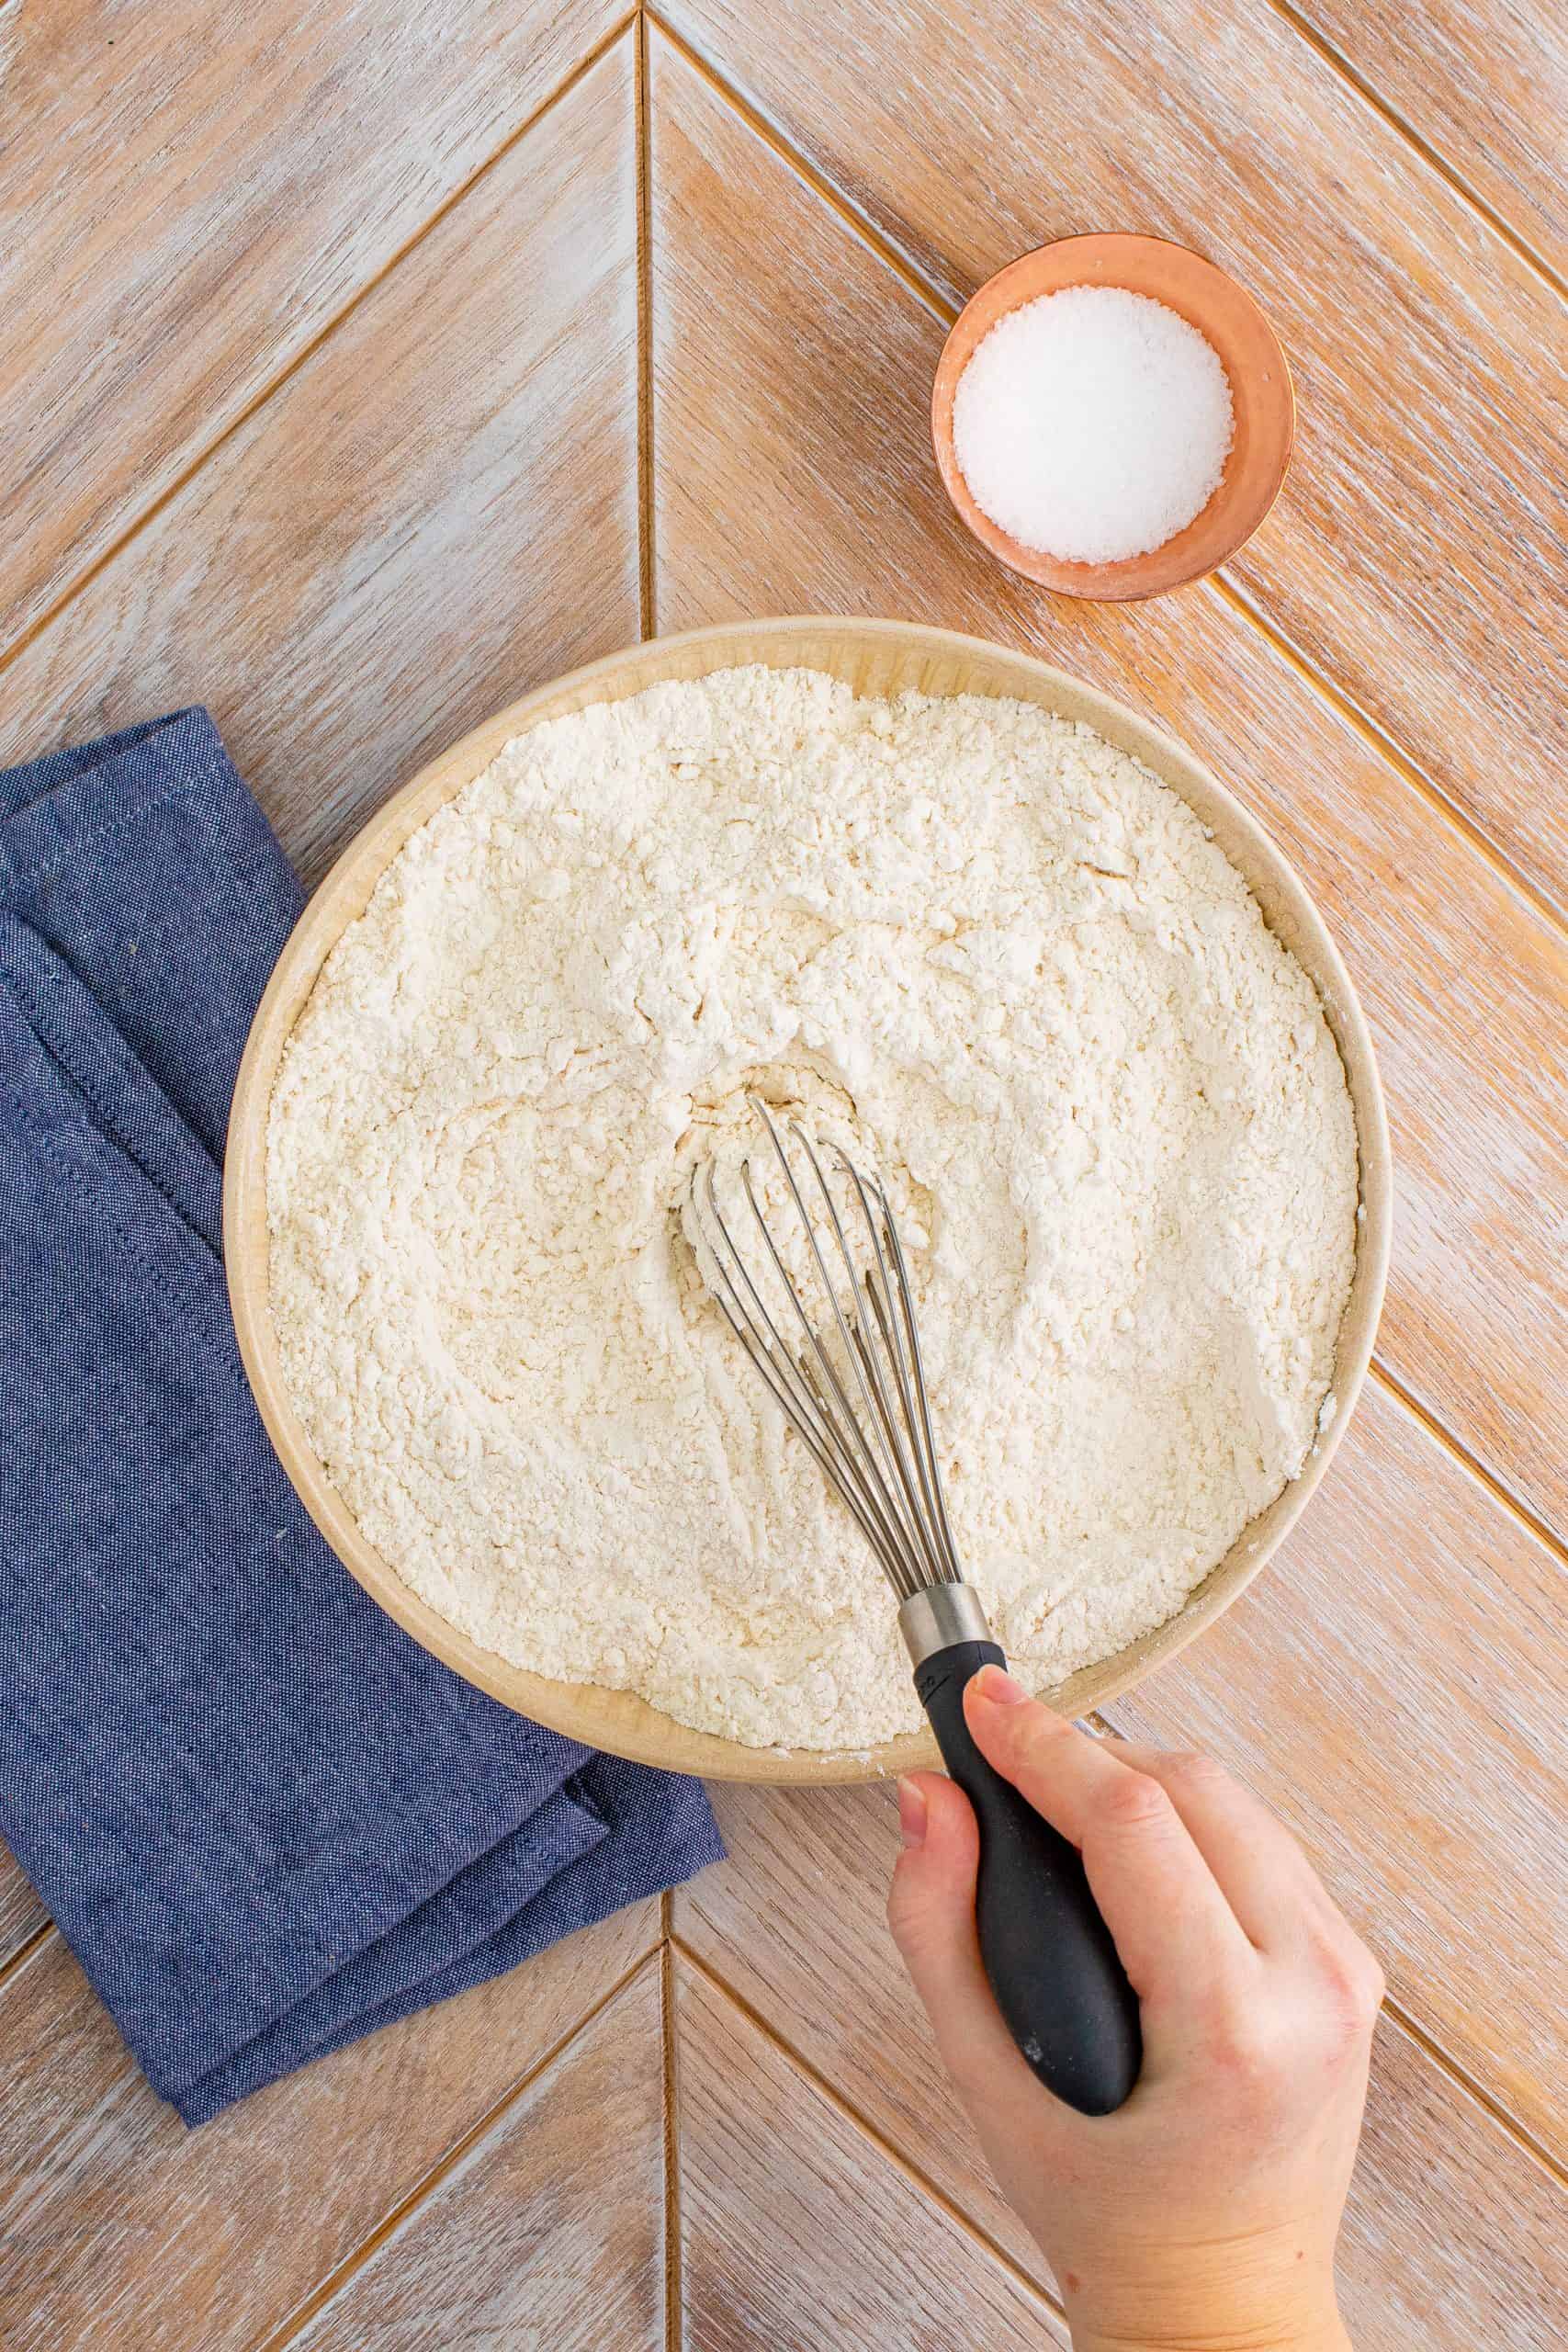 whisking together flour and salt in a bowl.